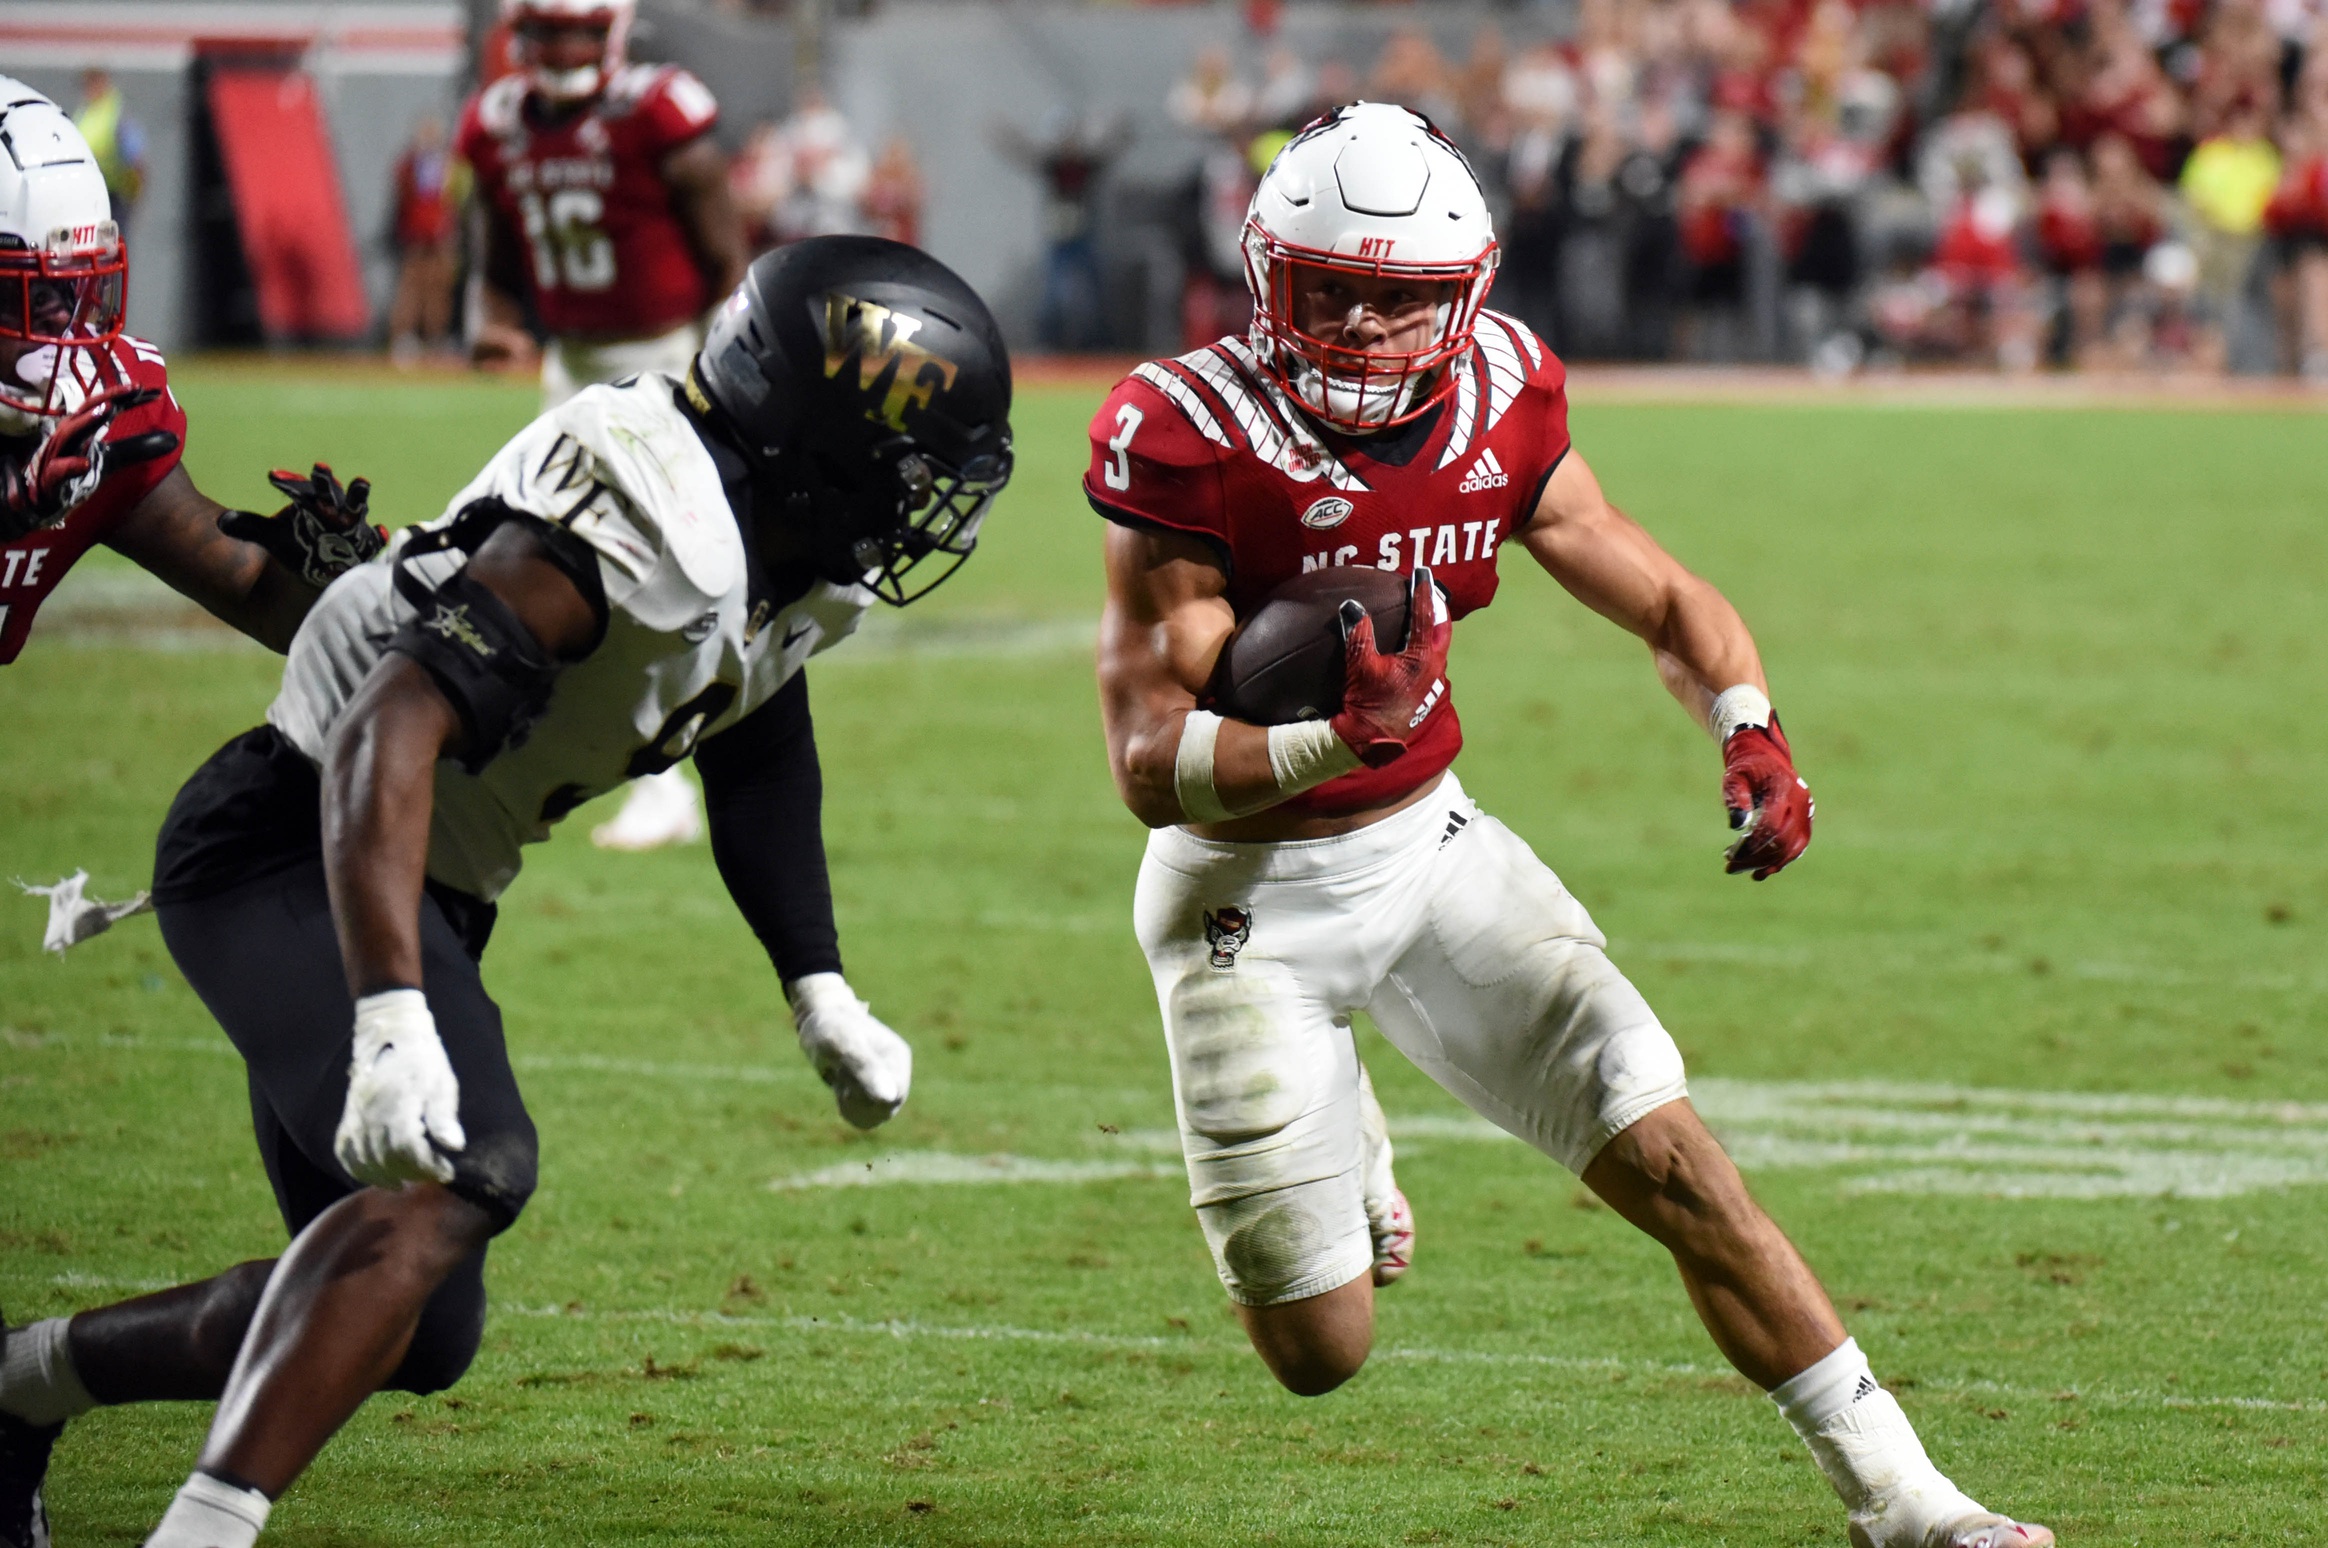 The NC State Offense will have to rely on the run game to control the tempo and complement a new offensive scheme in the 2023 season.